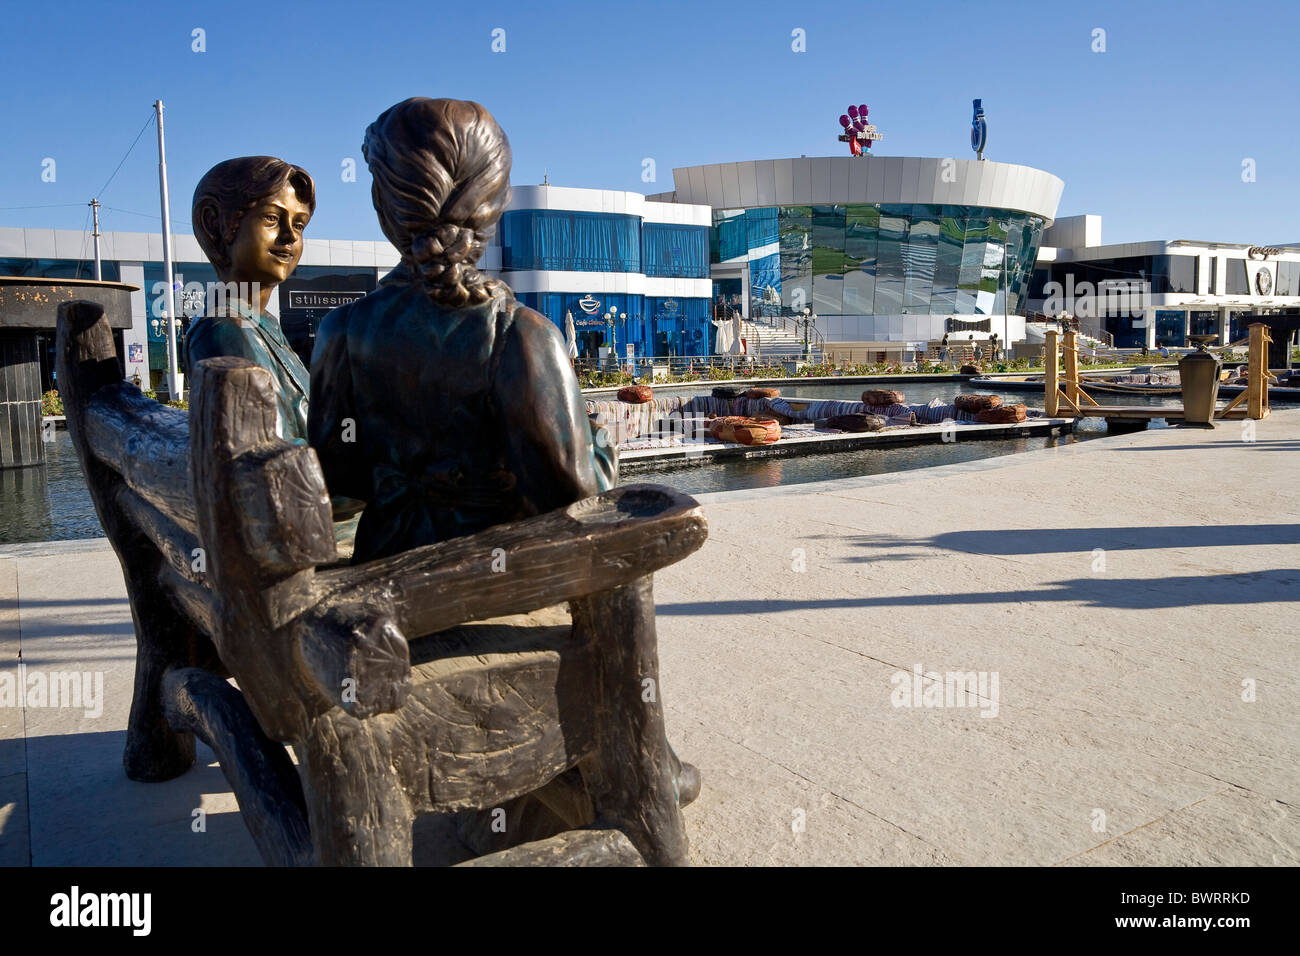 Bronze sculpture, in the back an ice rink and Culturama in a tourist area in Sharm el Sheikh, Egypt, Africa Stock Photo